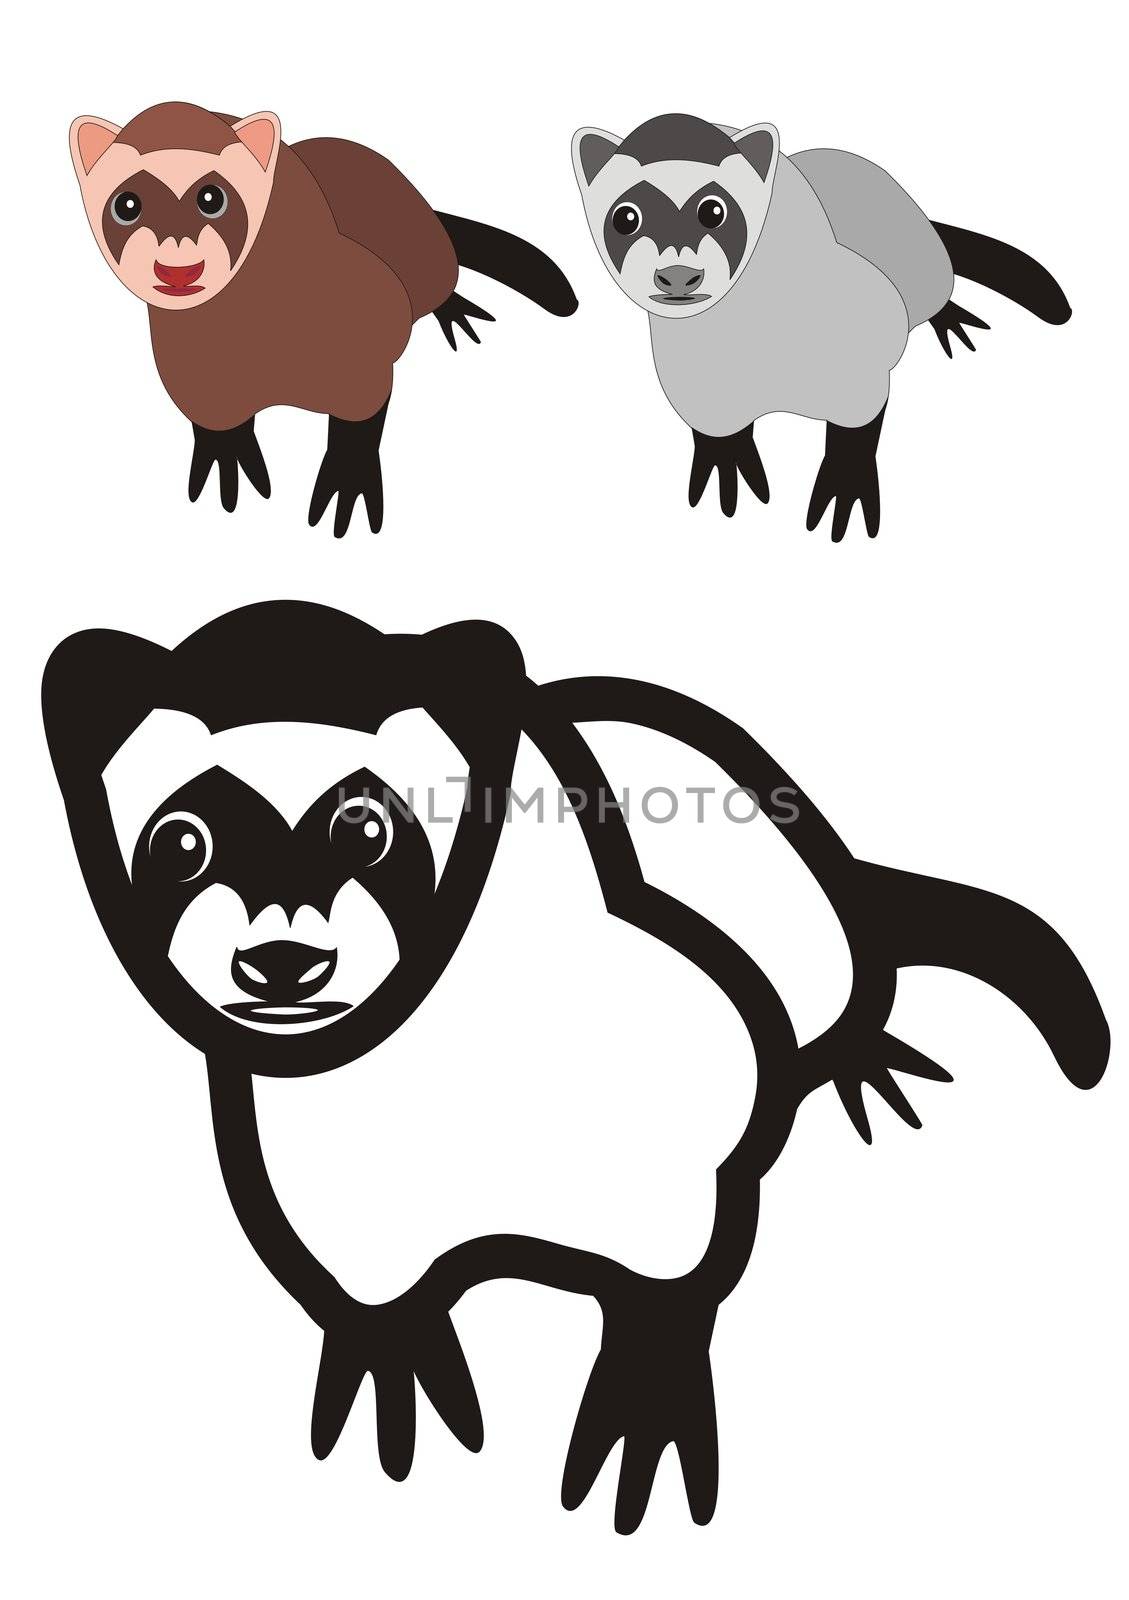 illustration of a ferret, black outlines, grayscale and color.